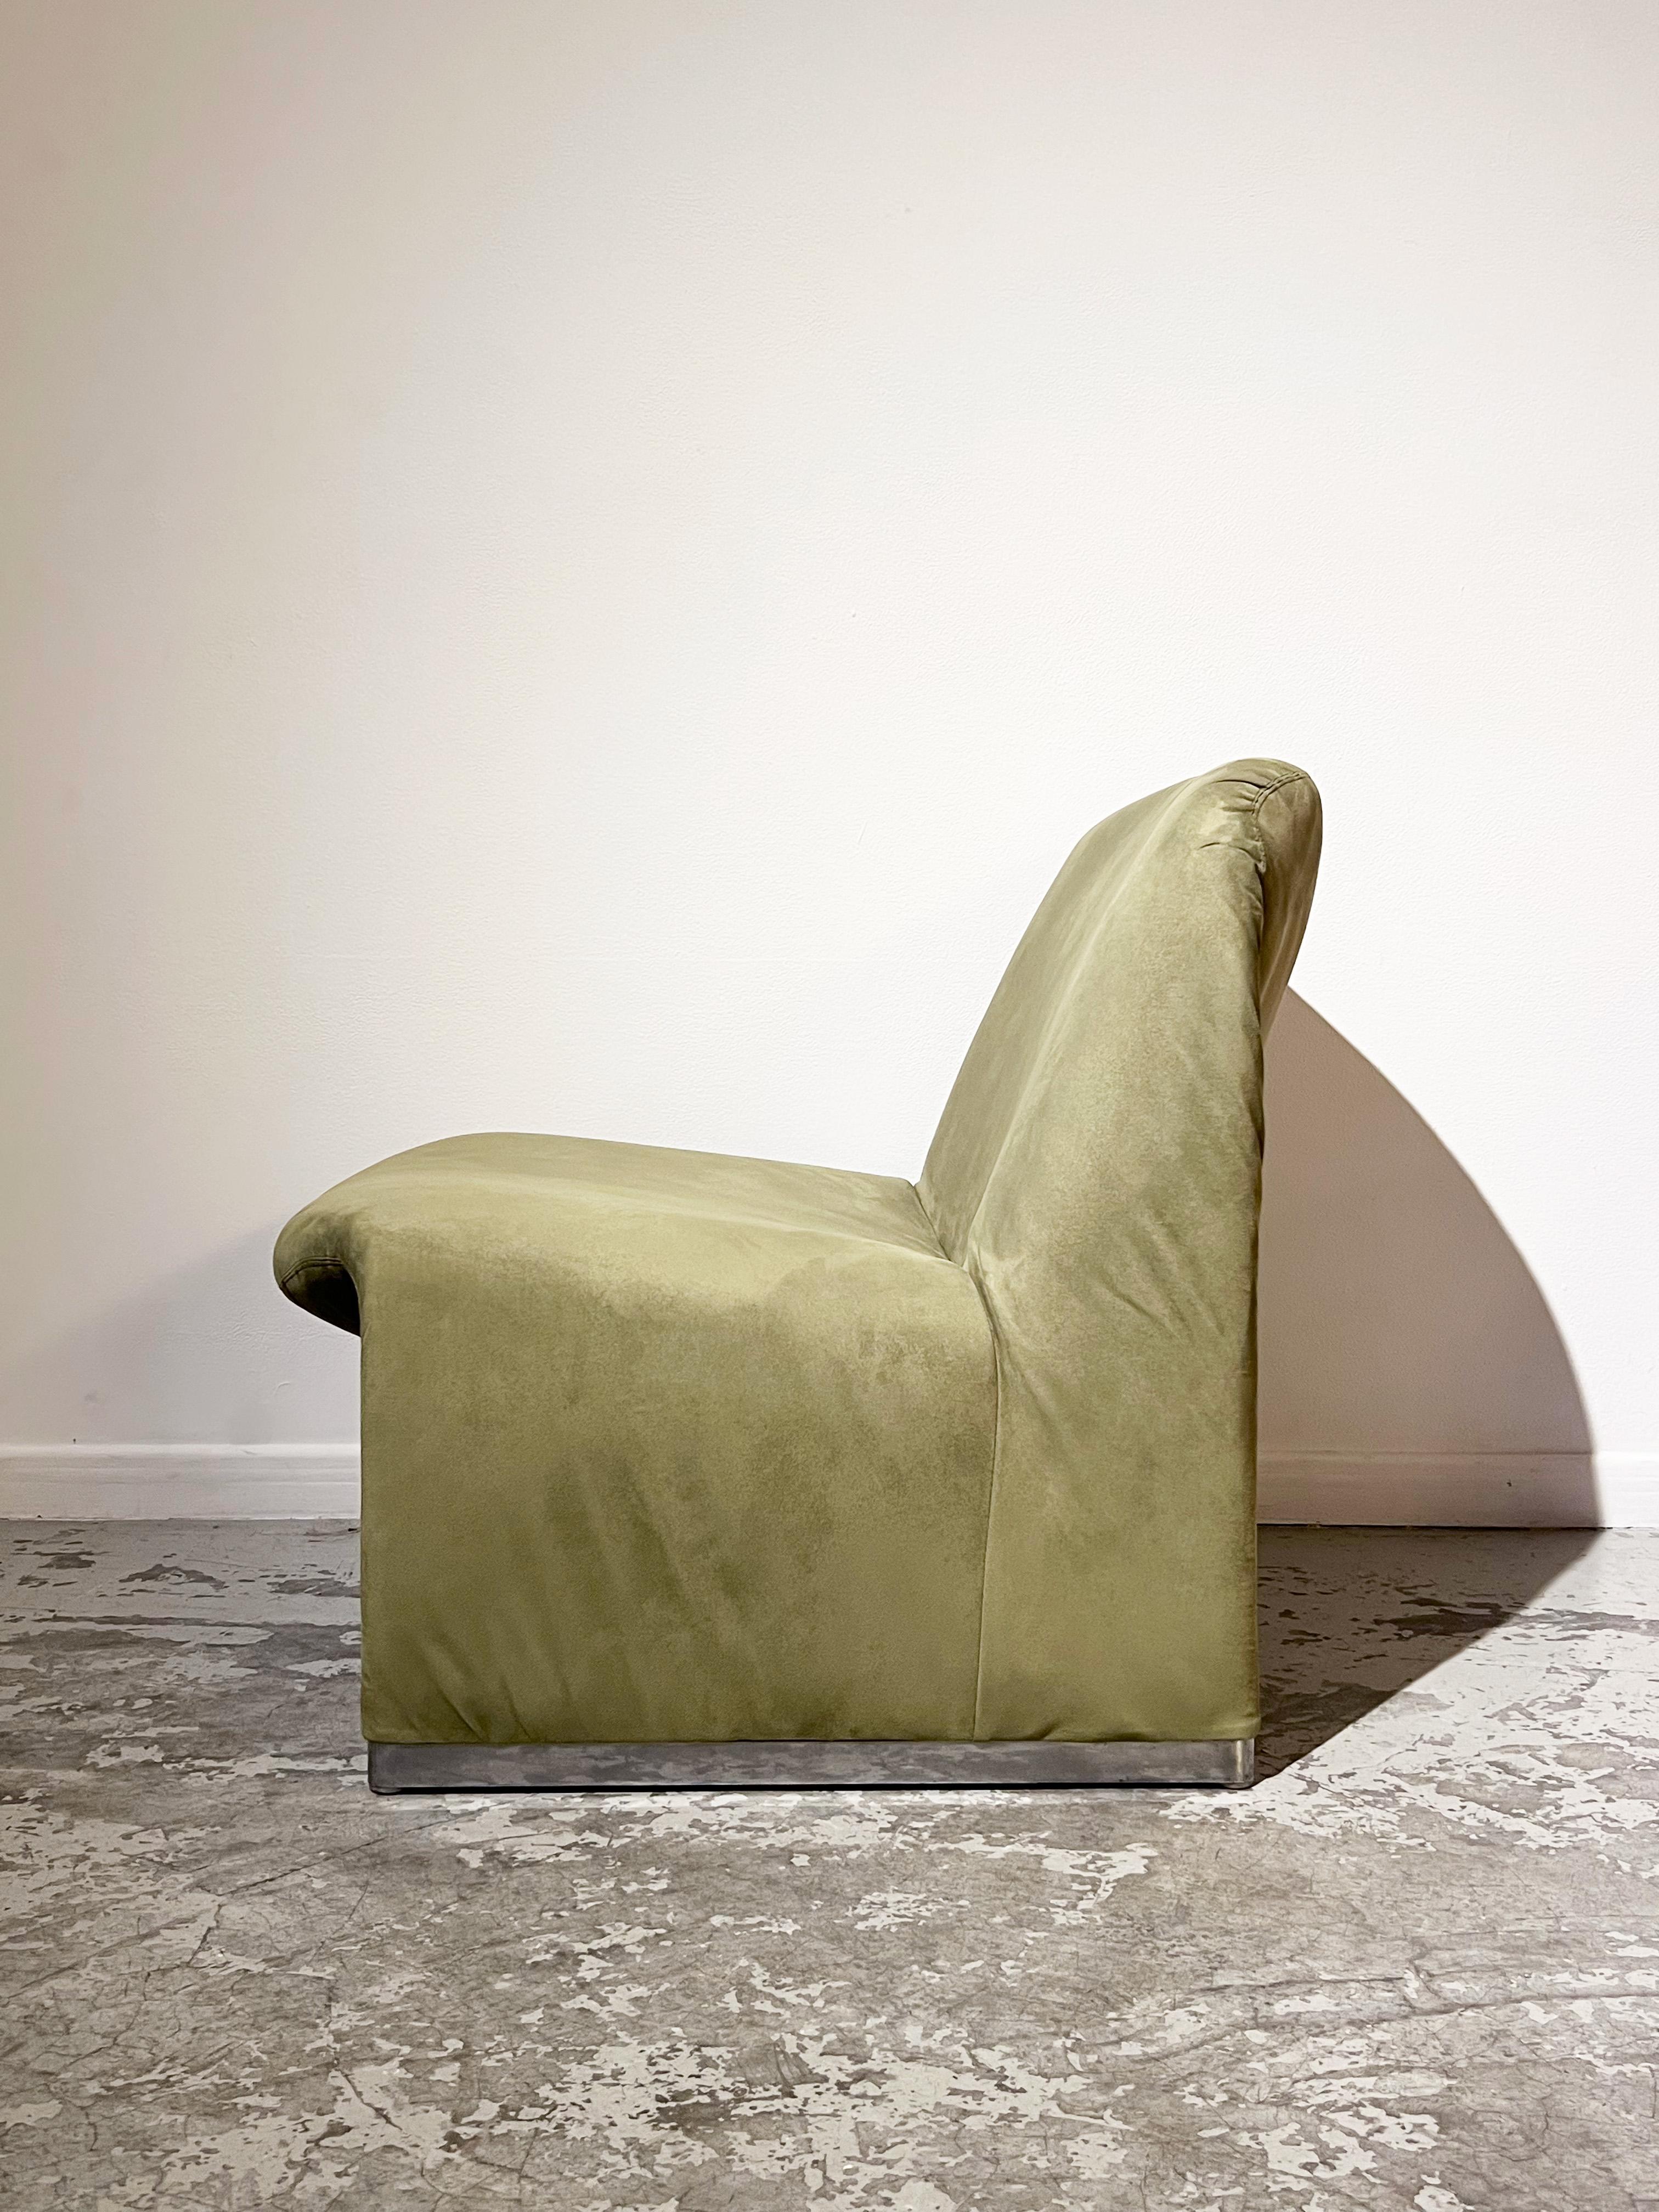 Late 20th Century Alky armchair by Giancarlo Piretti for Castelli Italy 70s